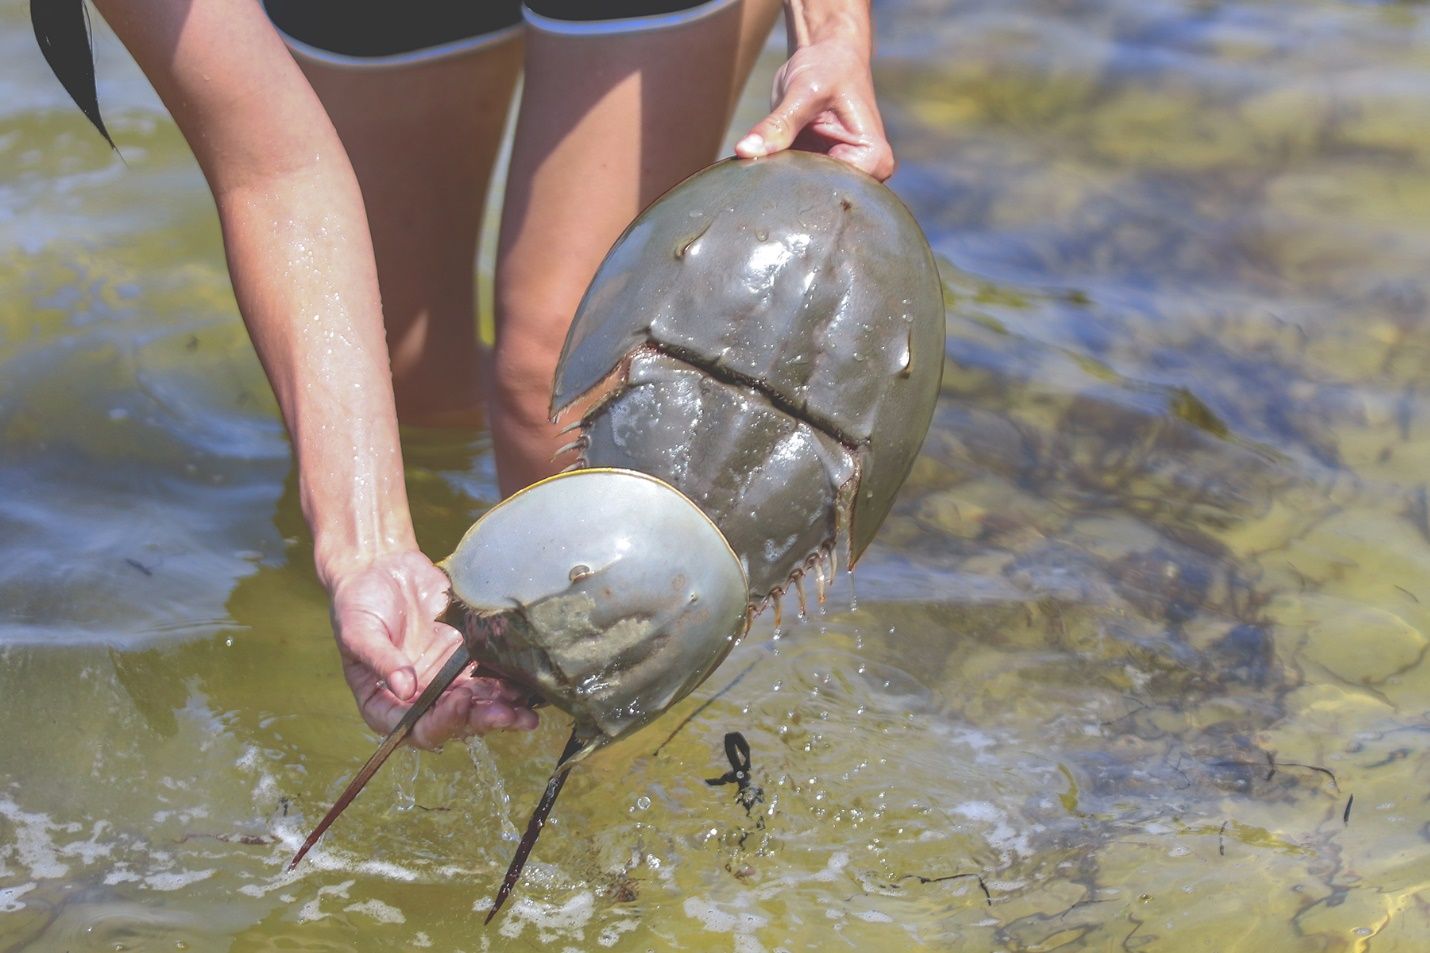 A pair of horseshoe crabs. They are protected by a hard, brown exoskeleton. Their tail is non-venomous and is used to flip themselves right side up. A pair of compound eyes is embedded into the hard carapace. Additional photoreceptors are present along the length of the tail and carapace.